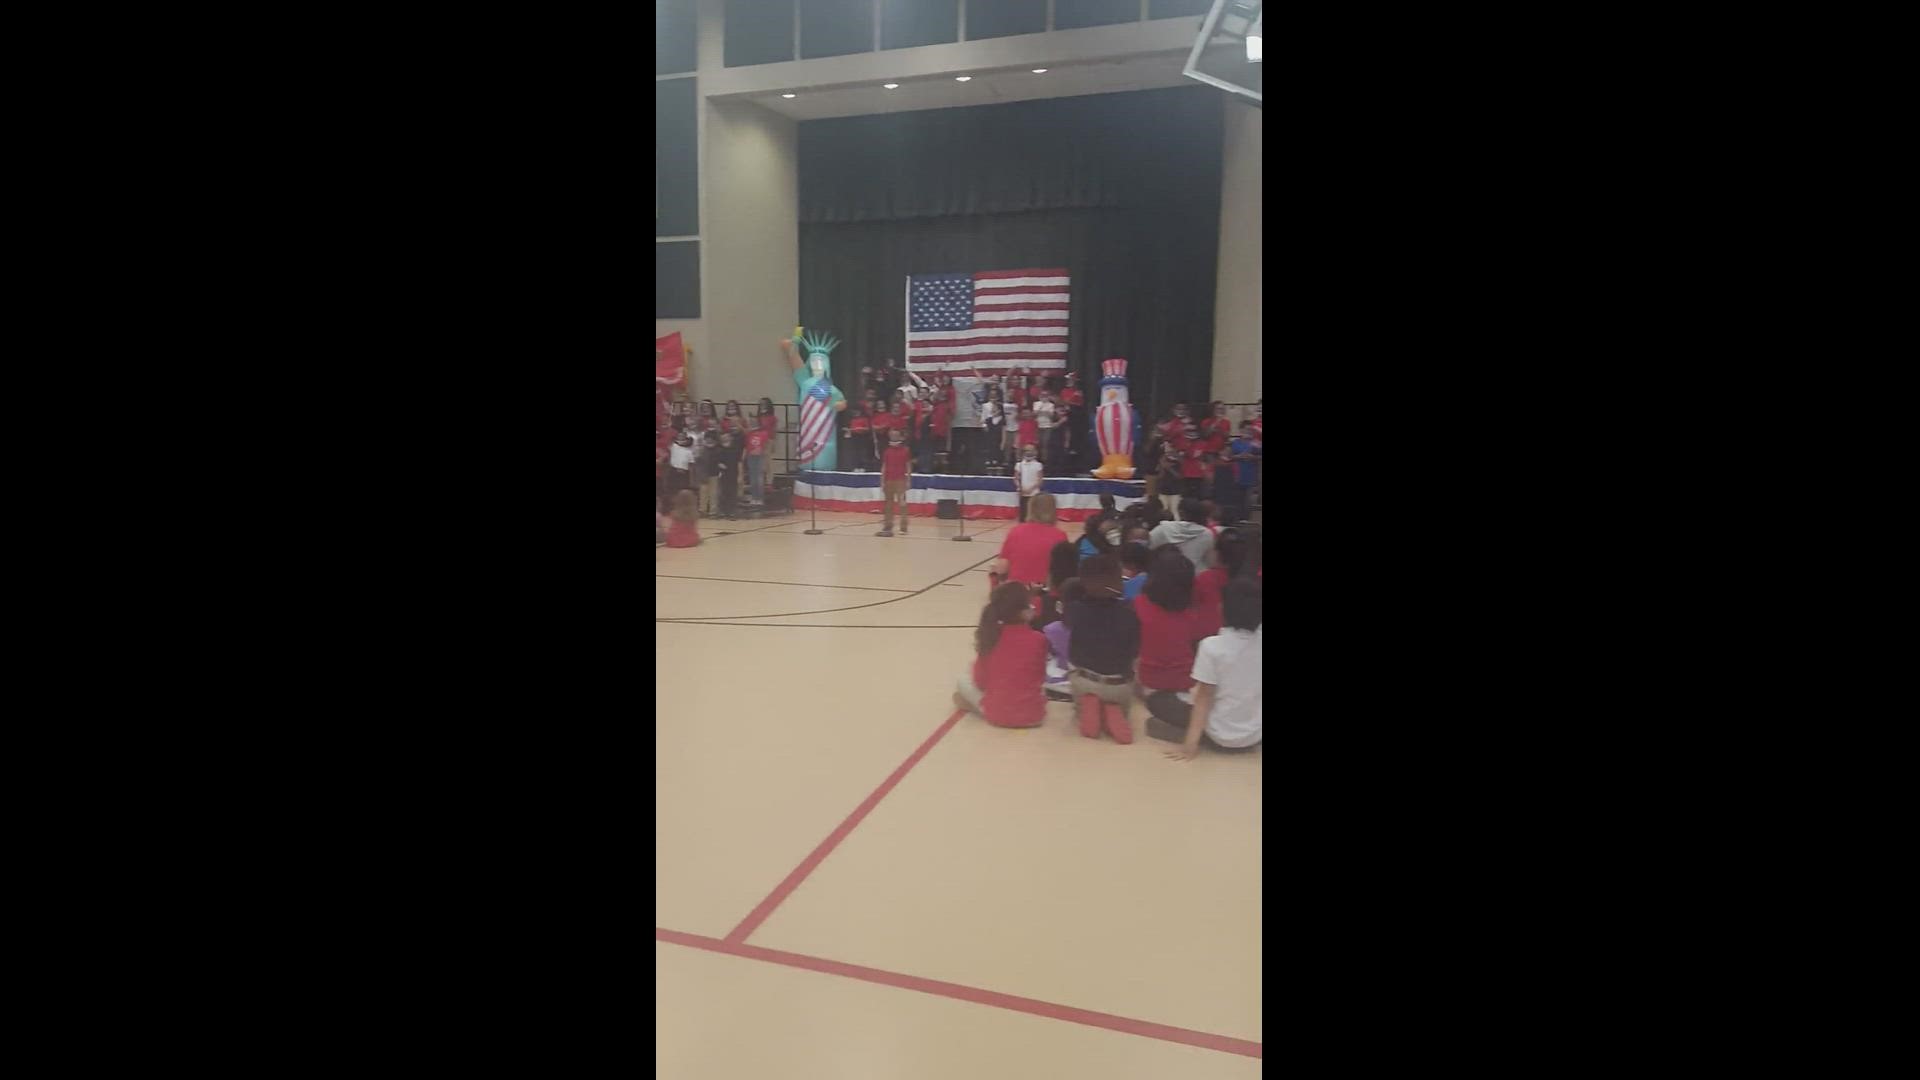 Beautiful program with salute and great pride to Veterans, Flag and America Regina-Howell 2nd graders.
Credit: Tom LeTourneau